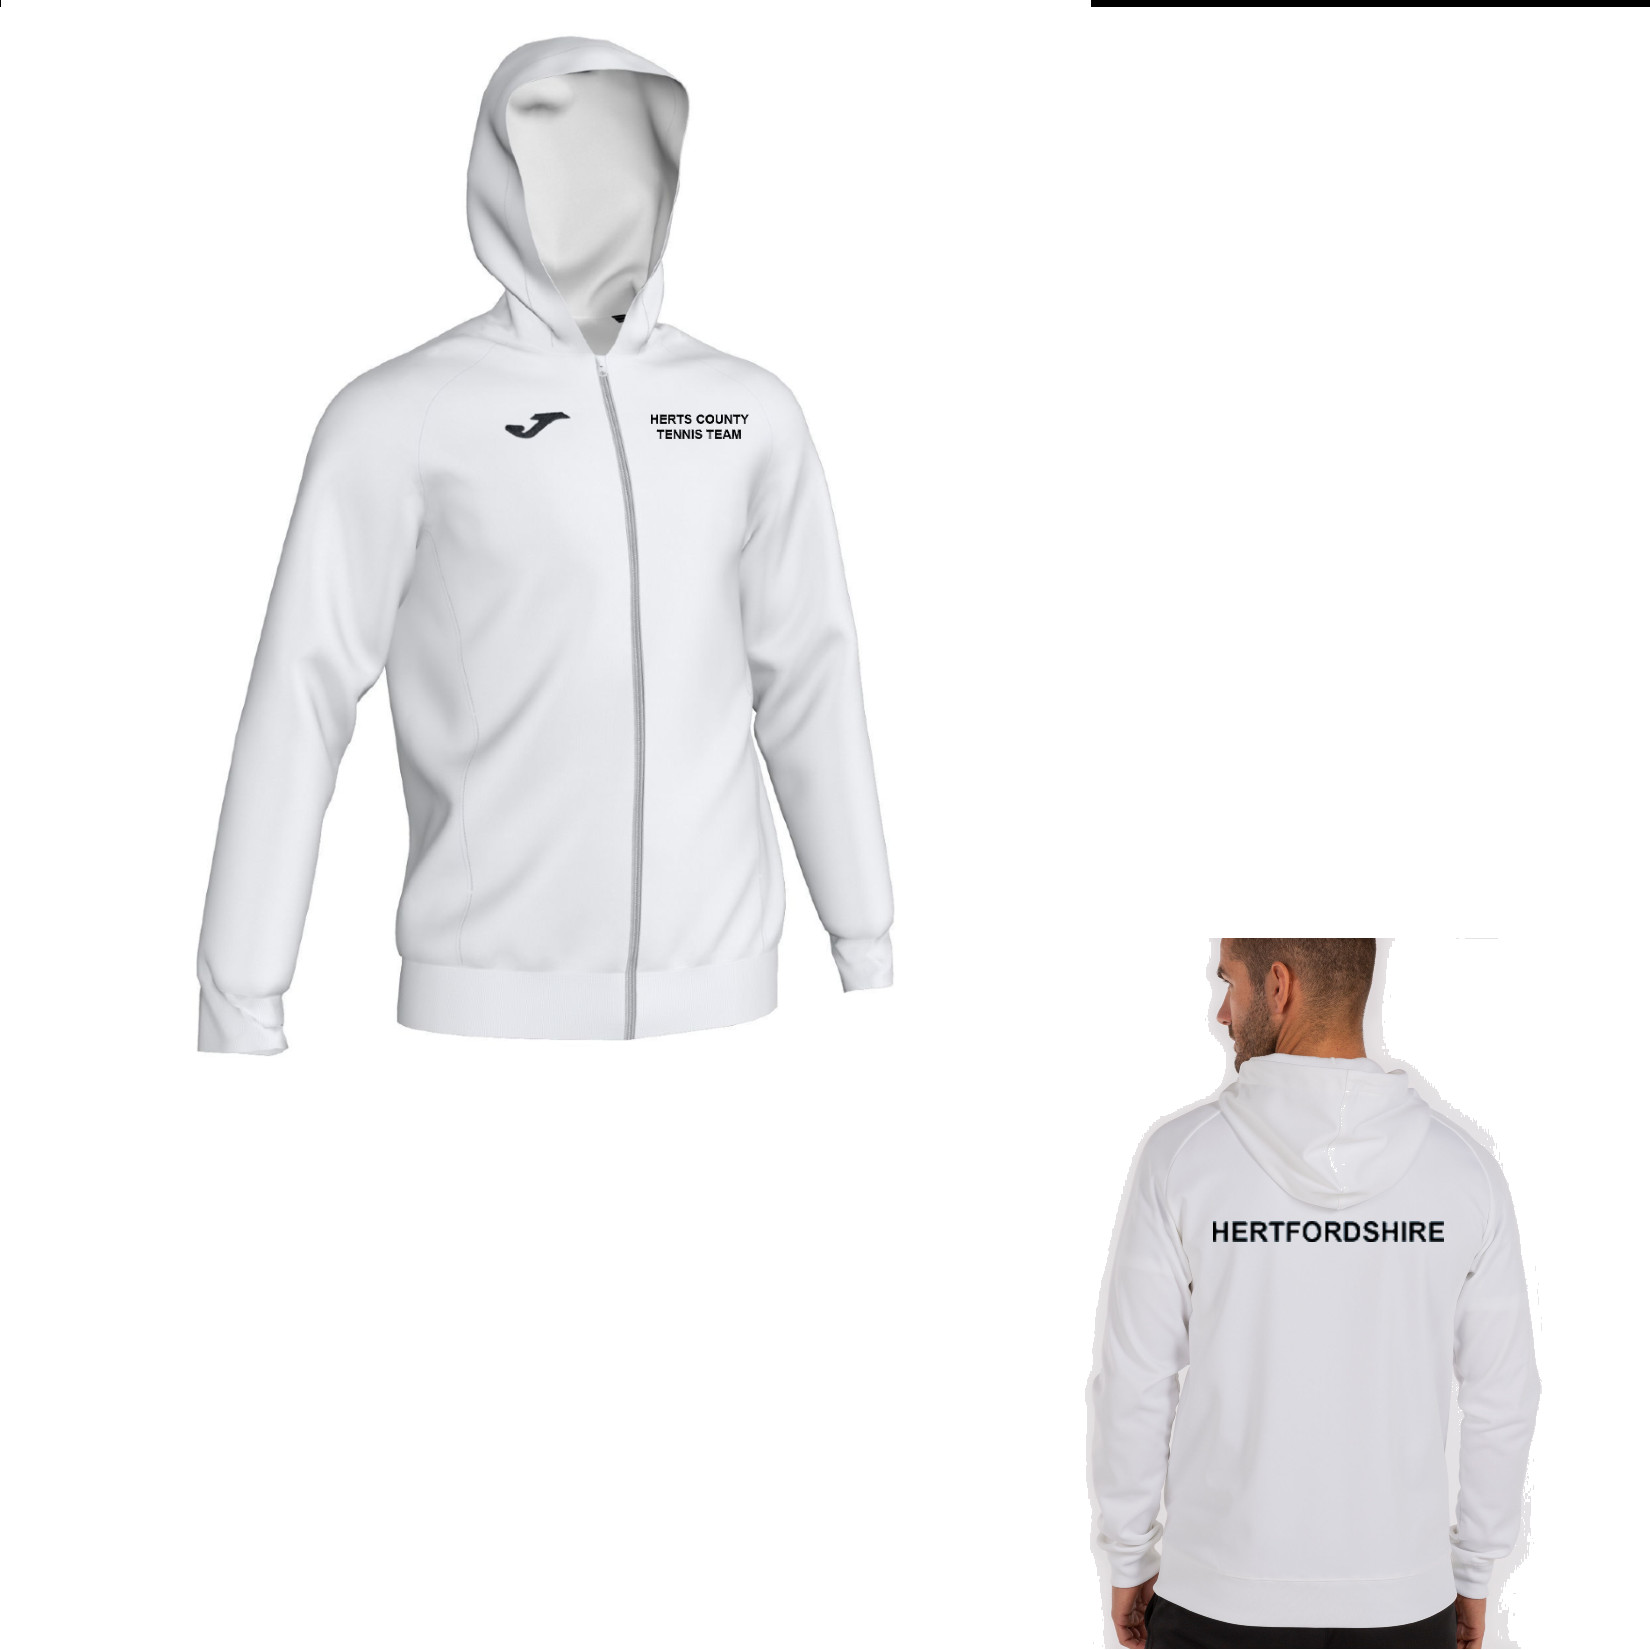 Joma Menfis Zip Hooded Track Jacket White